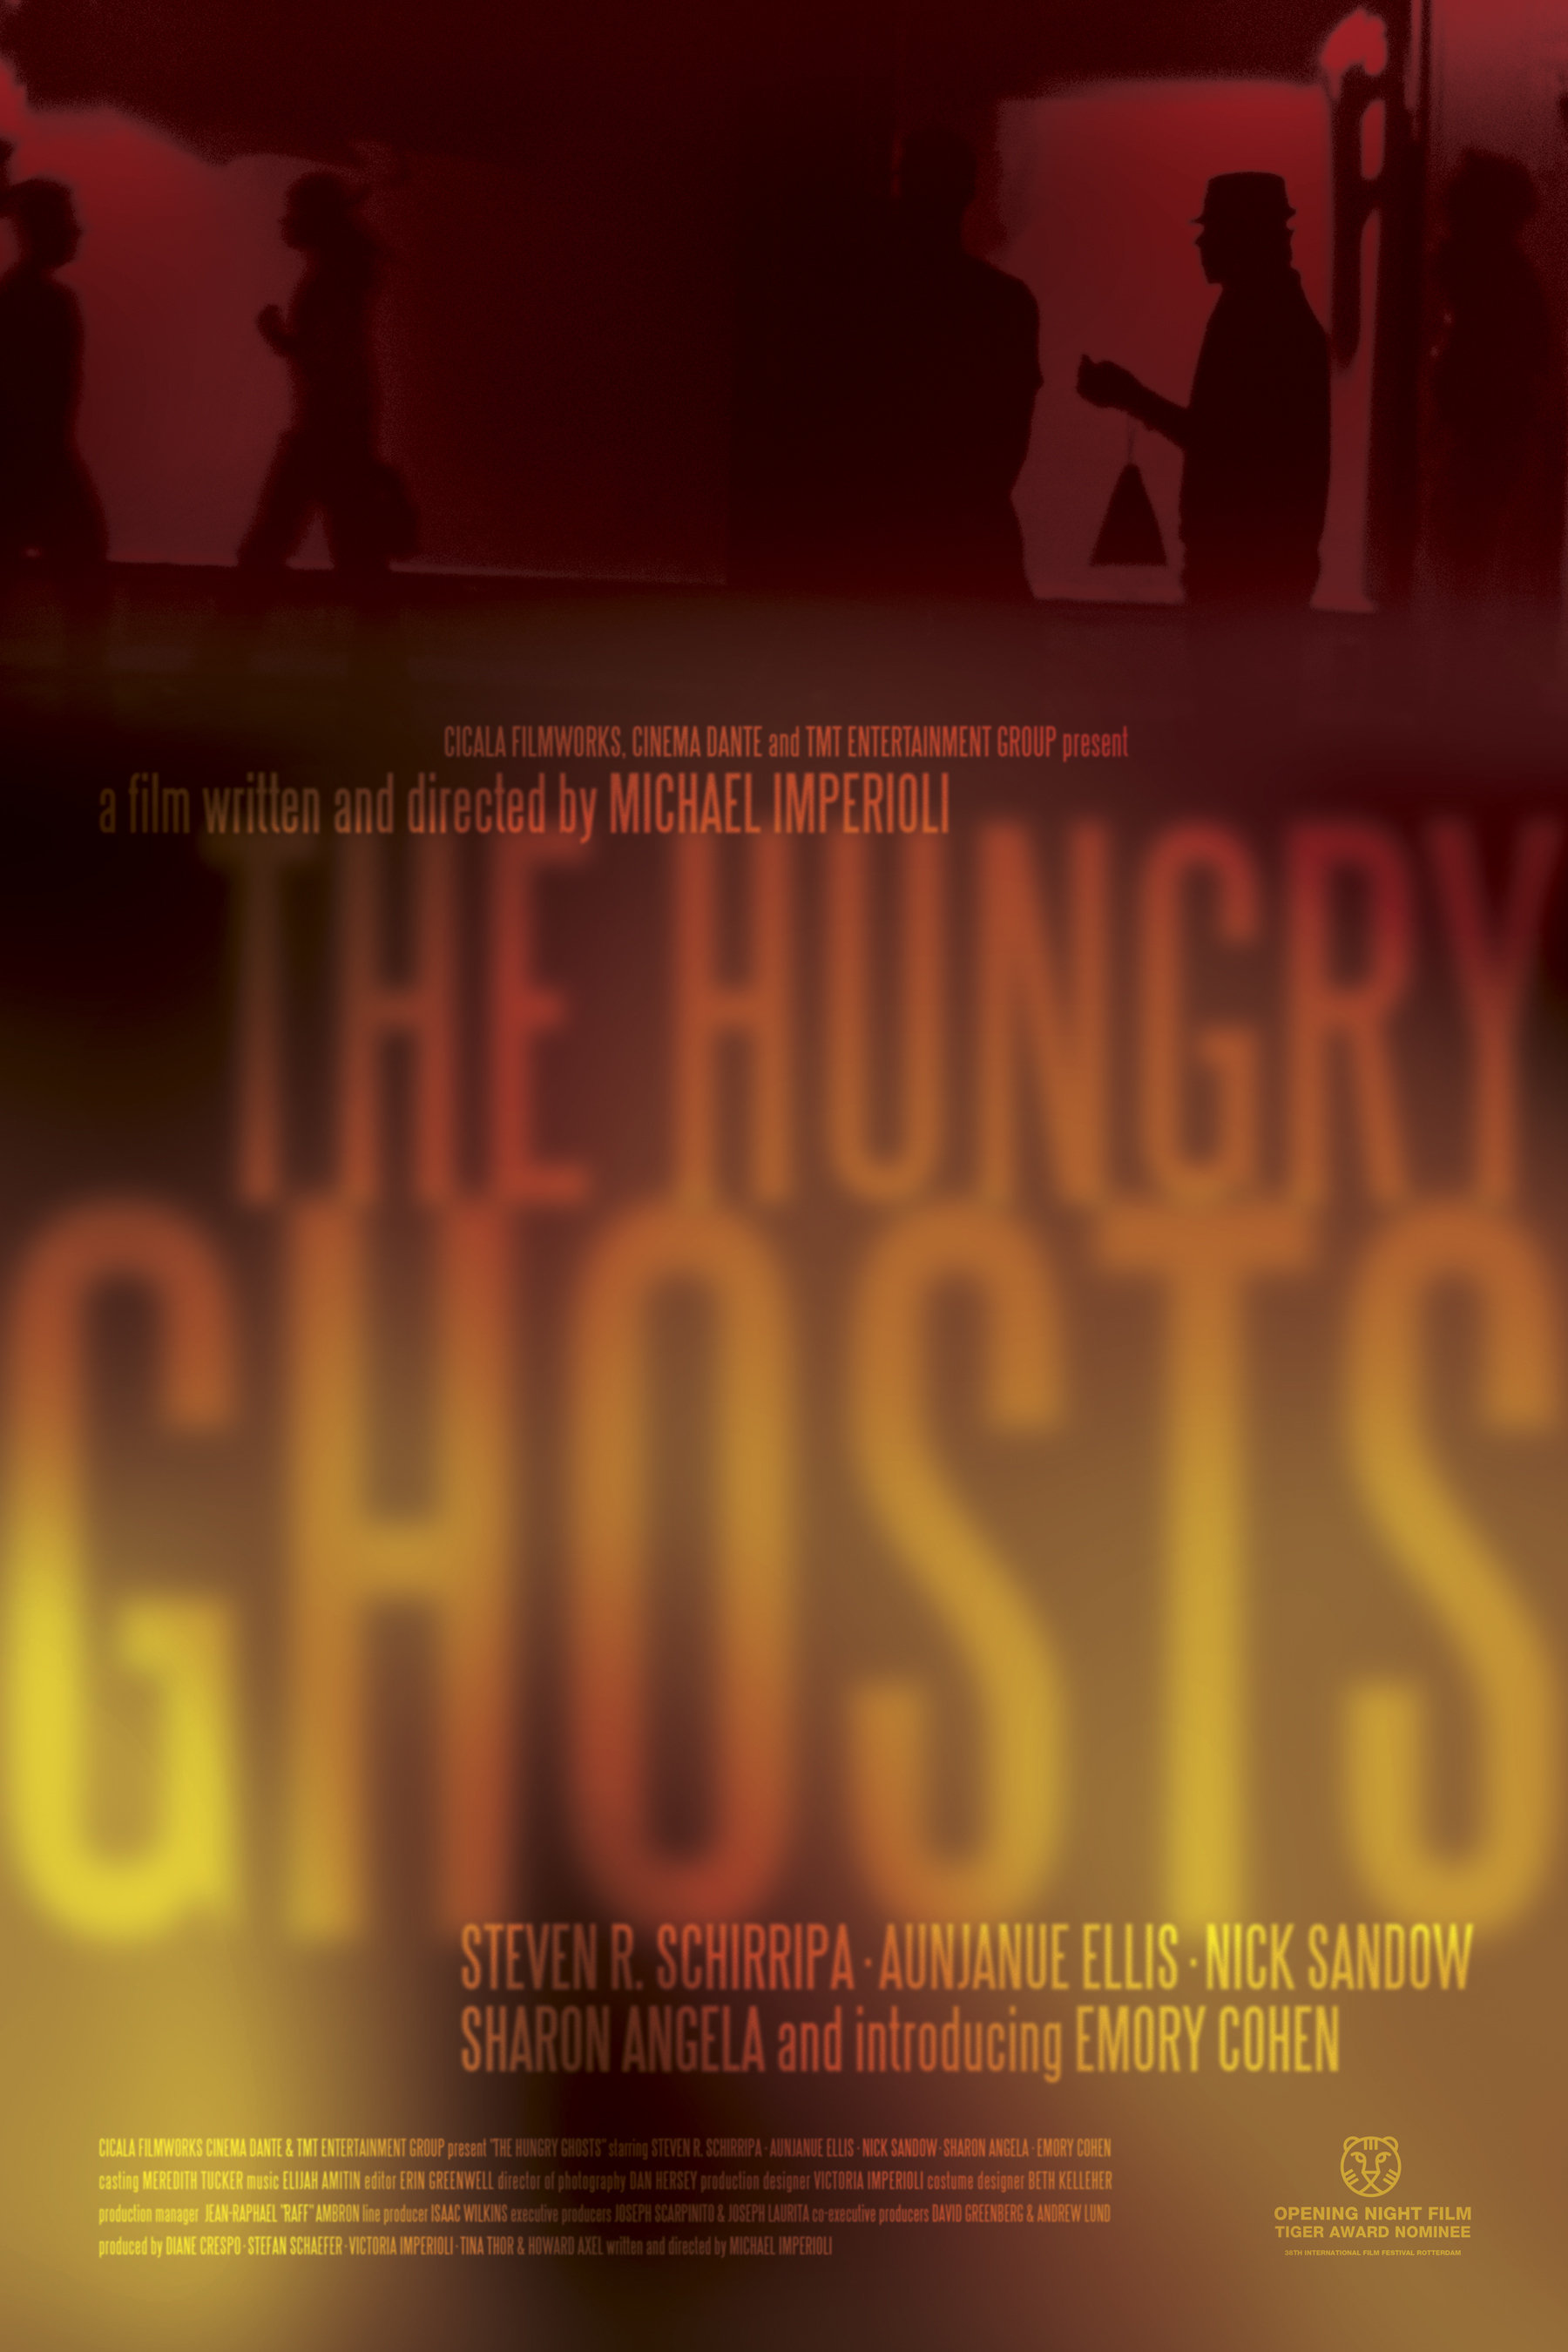 The Hungry Ghosts (2009) Screenshot 1